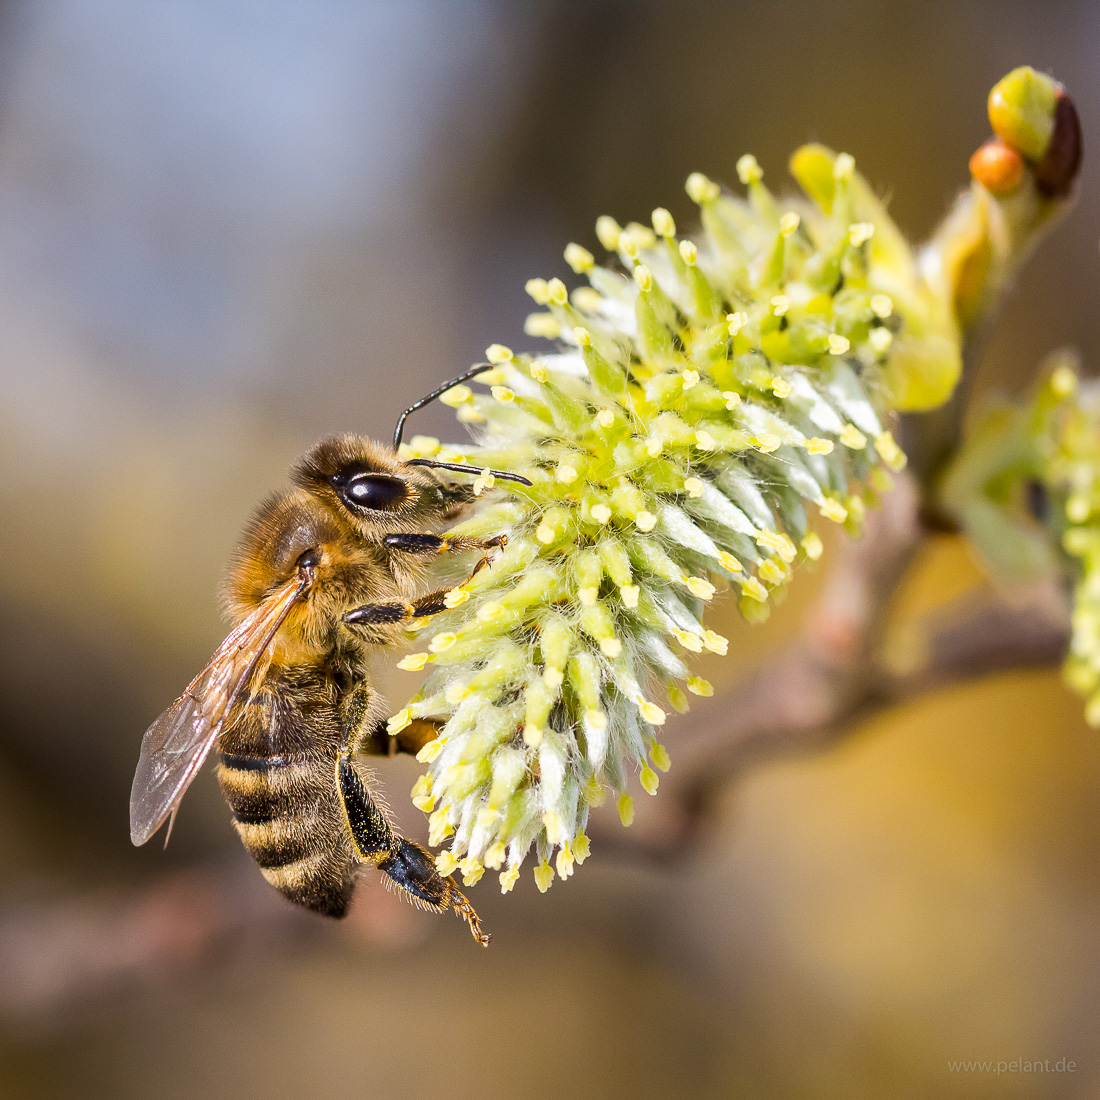 honey bee on a female willow catkin of the goat willow (Salix caprea)